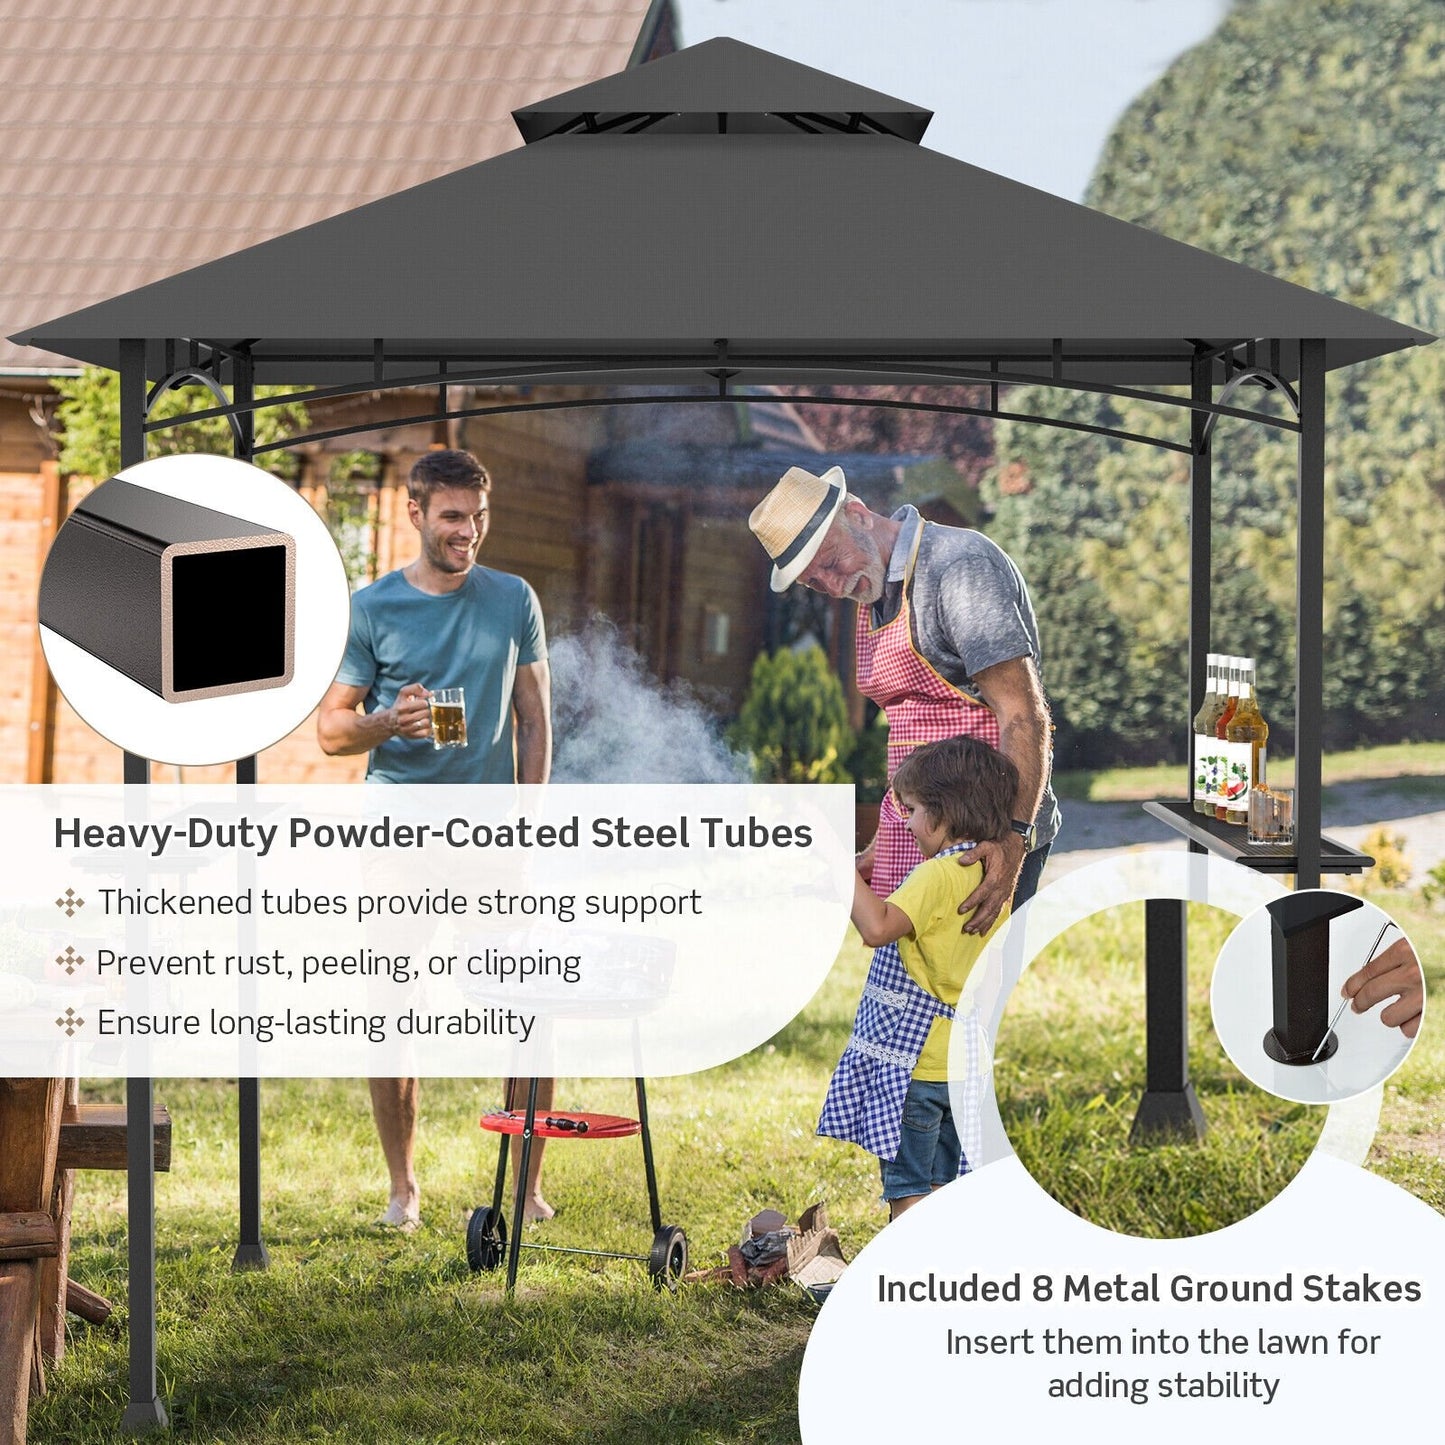 8 x 5 Feet Outdoor Barbecue Grill Gazebo Canopy Tent BBQ Shelter, Dark Gray at Gallery Canada